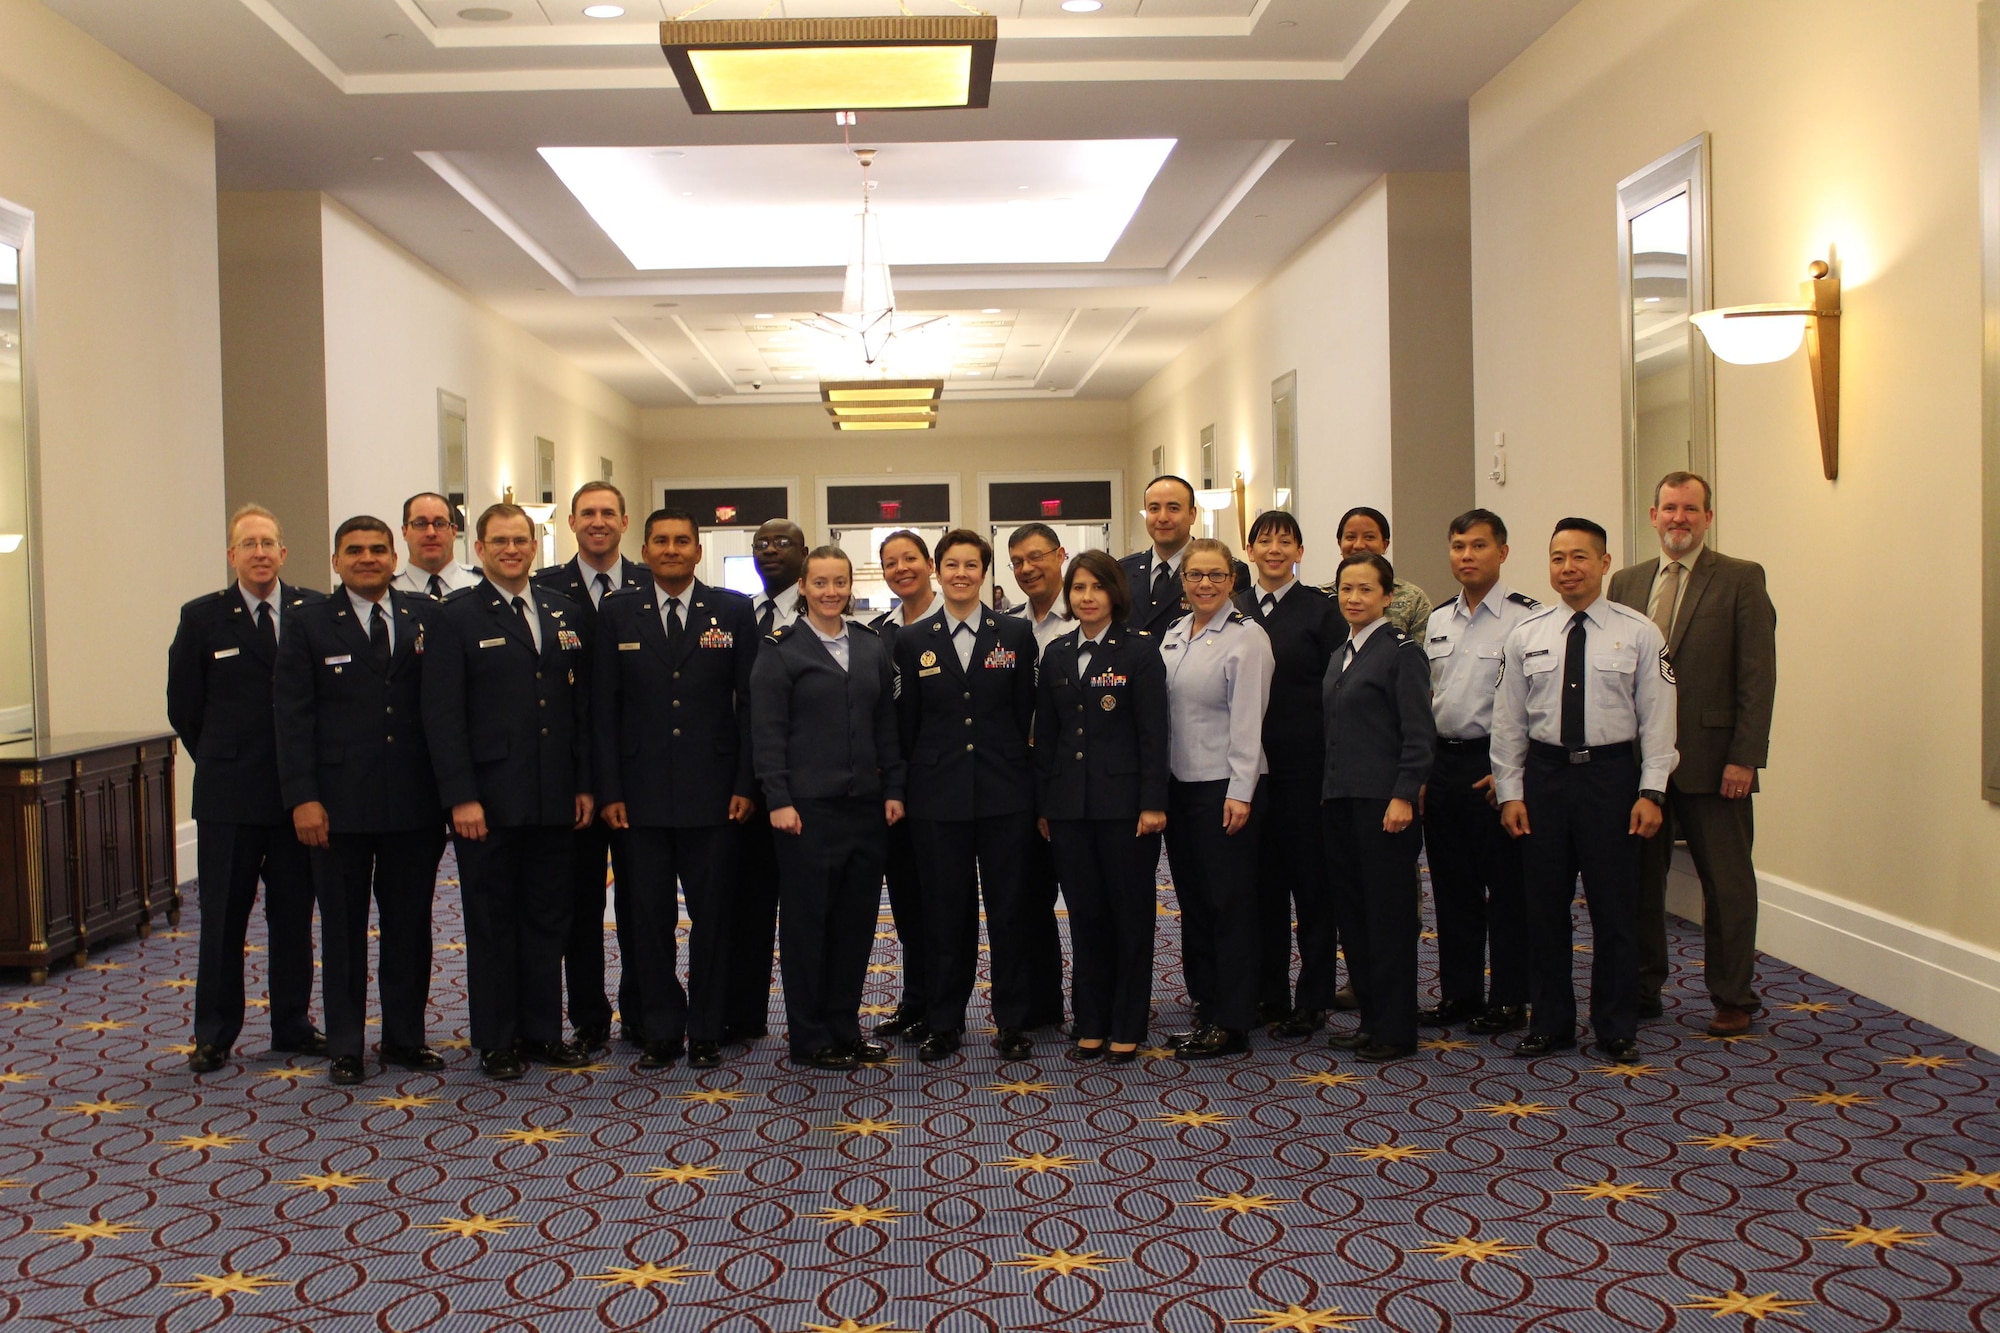 A group of U.S. Air Force Medical International Health Specialists (IHSs) pose for a group photo at the 2017 Association of Military Surgeons of the United States (AMSUS) conference, Nov 30, 2017. IHSs are made up of health care professionals who bring their diverse intercultural, medical, and military operations experiences together to build partnership capabilities in allied countries. (U.S. Air Force photo by Karina Luis)